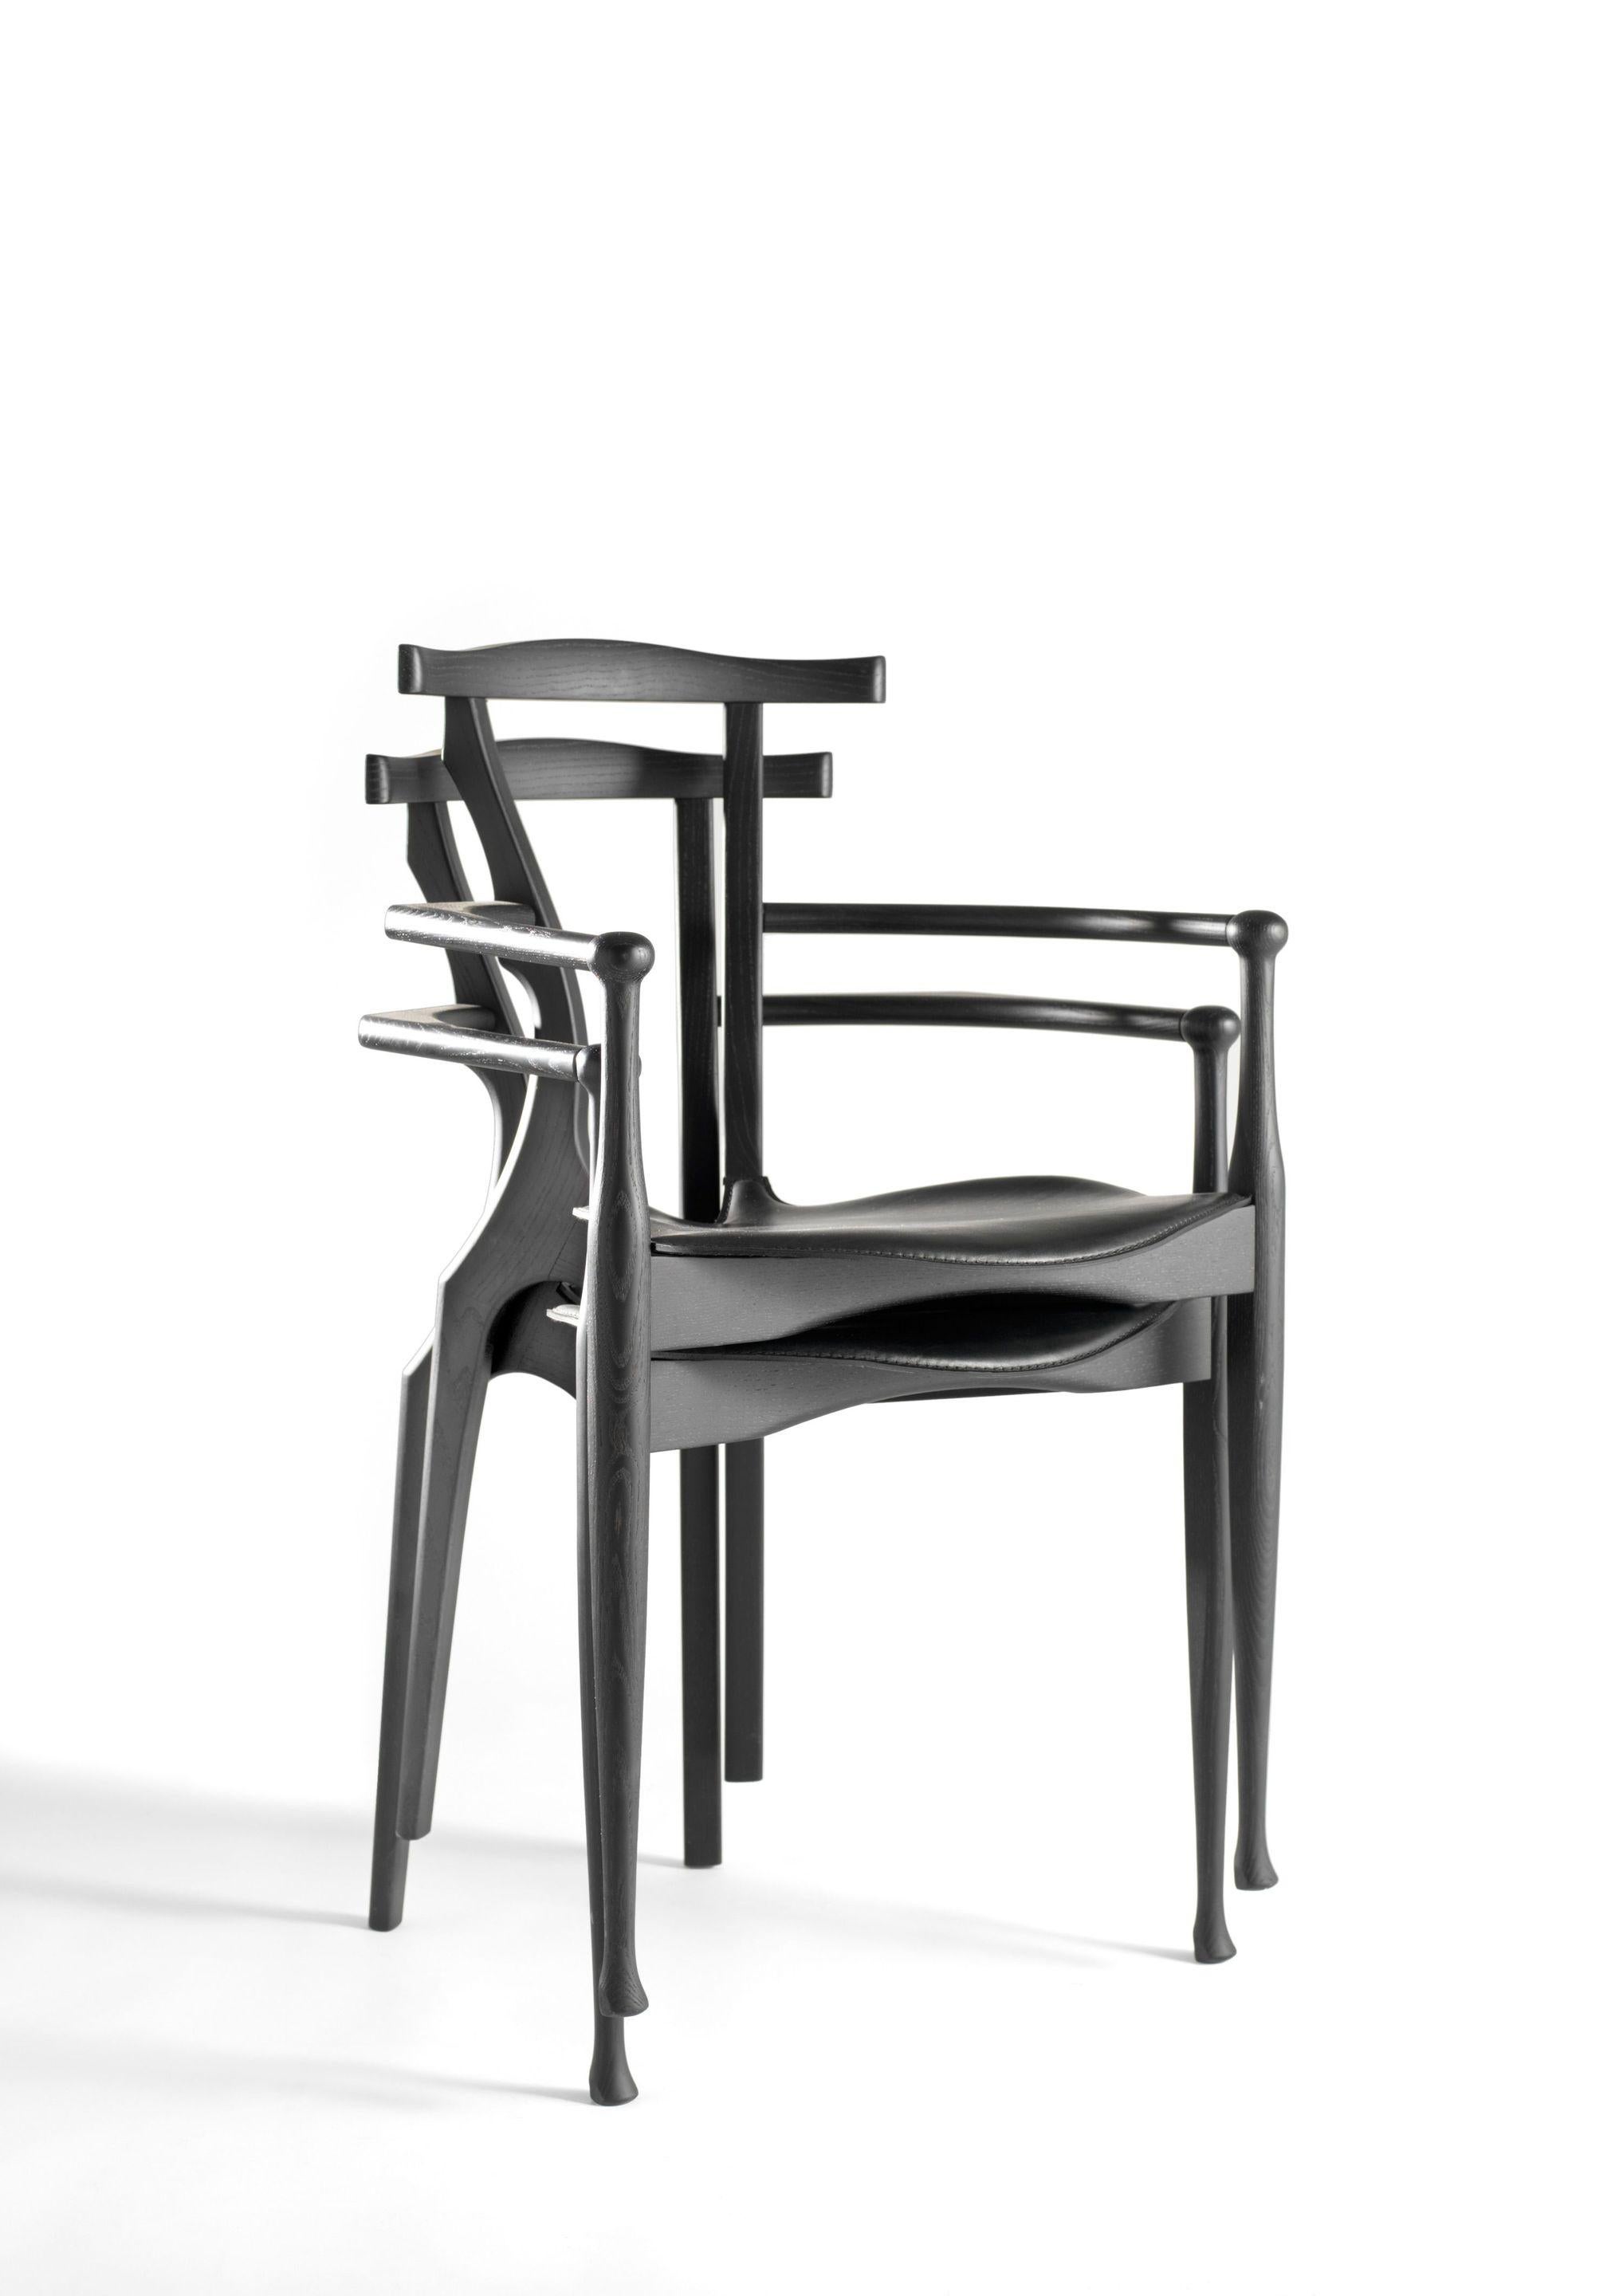 Gaulino chair by Oscar Tusquets
Dimensions: D 51 x W 55 x H 84 cm 
Materials: structure and backrest in solid natural ash, lacquered in black or varnished. Seat upholstered in natural or black leather.
Available in black.


The chair is made